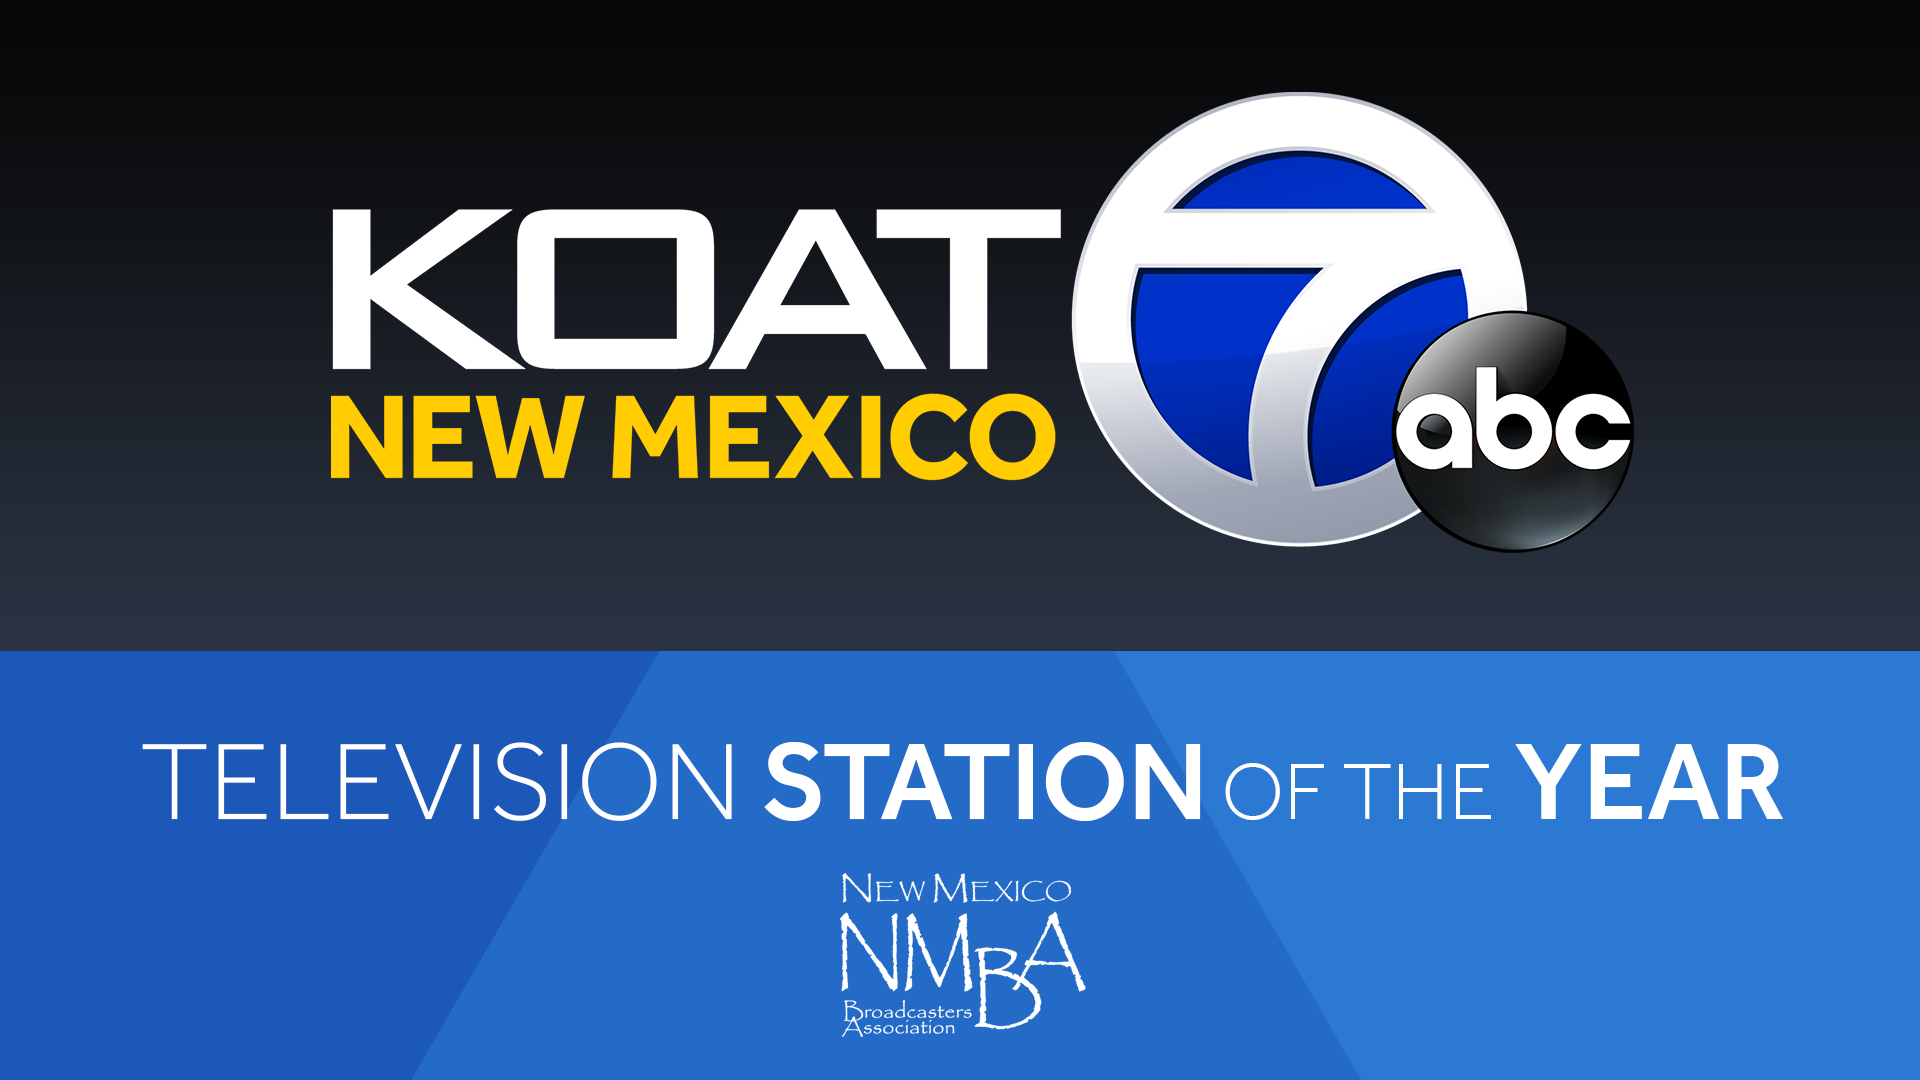 KOAT NAMED STATION OF THE YEAR